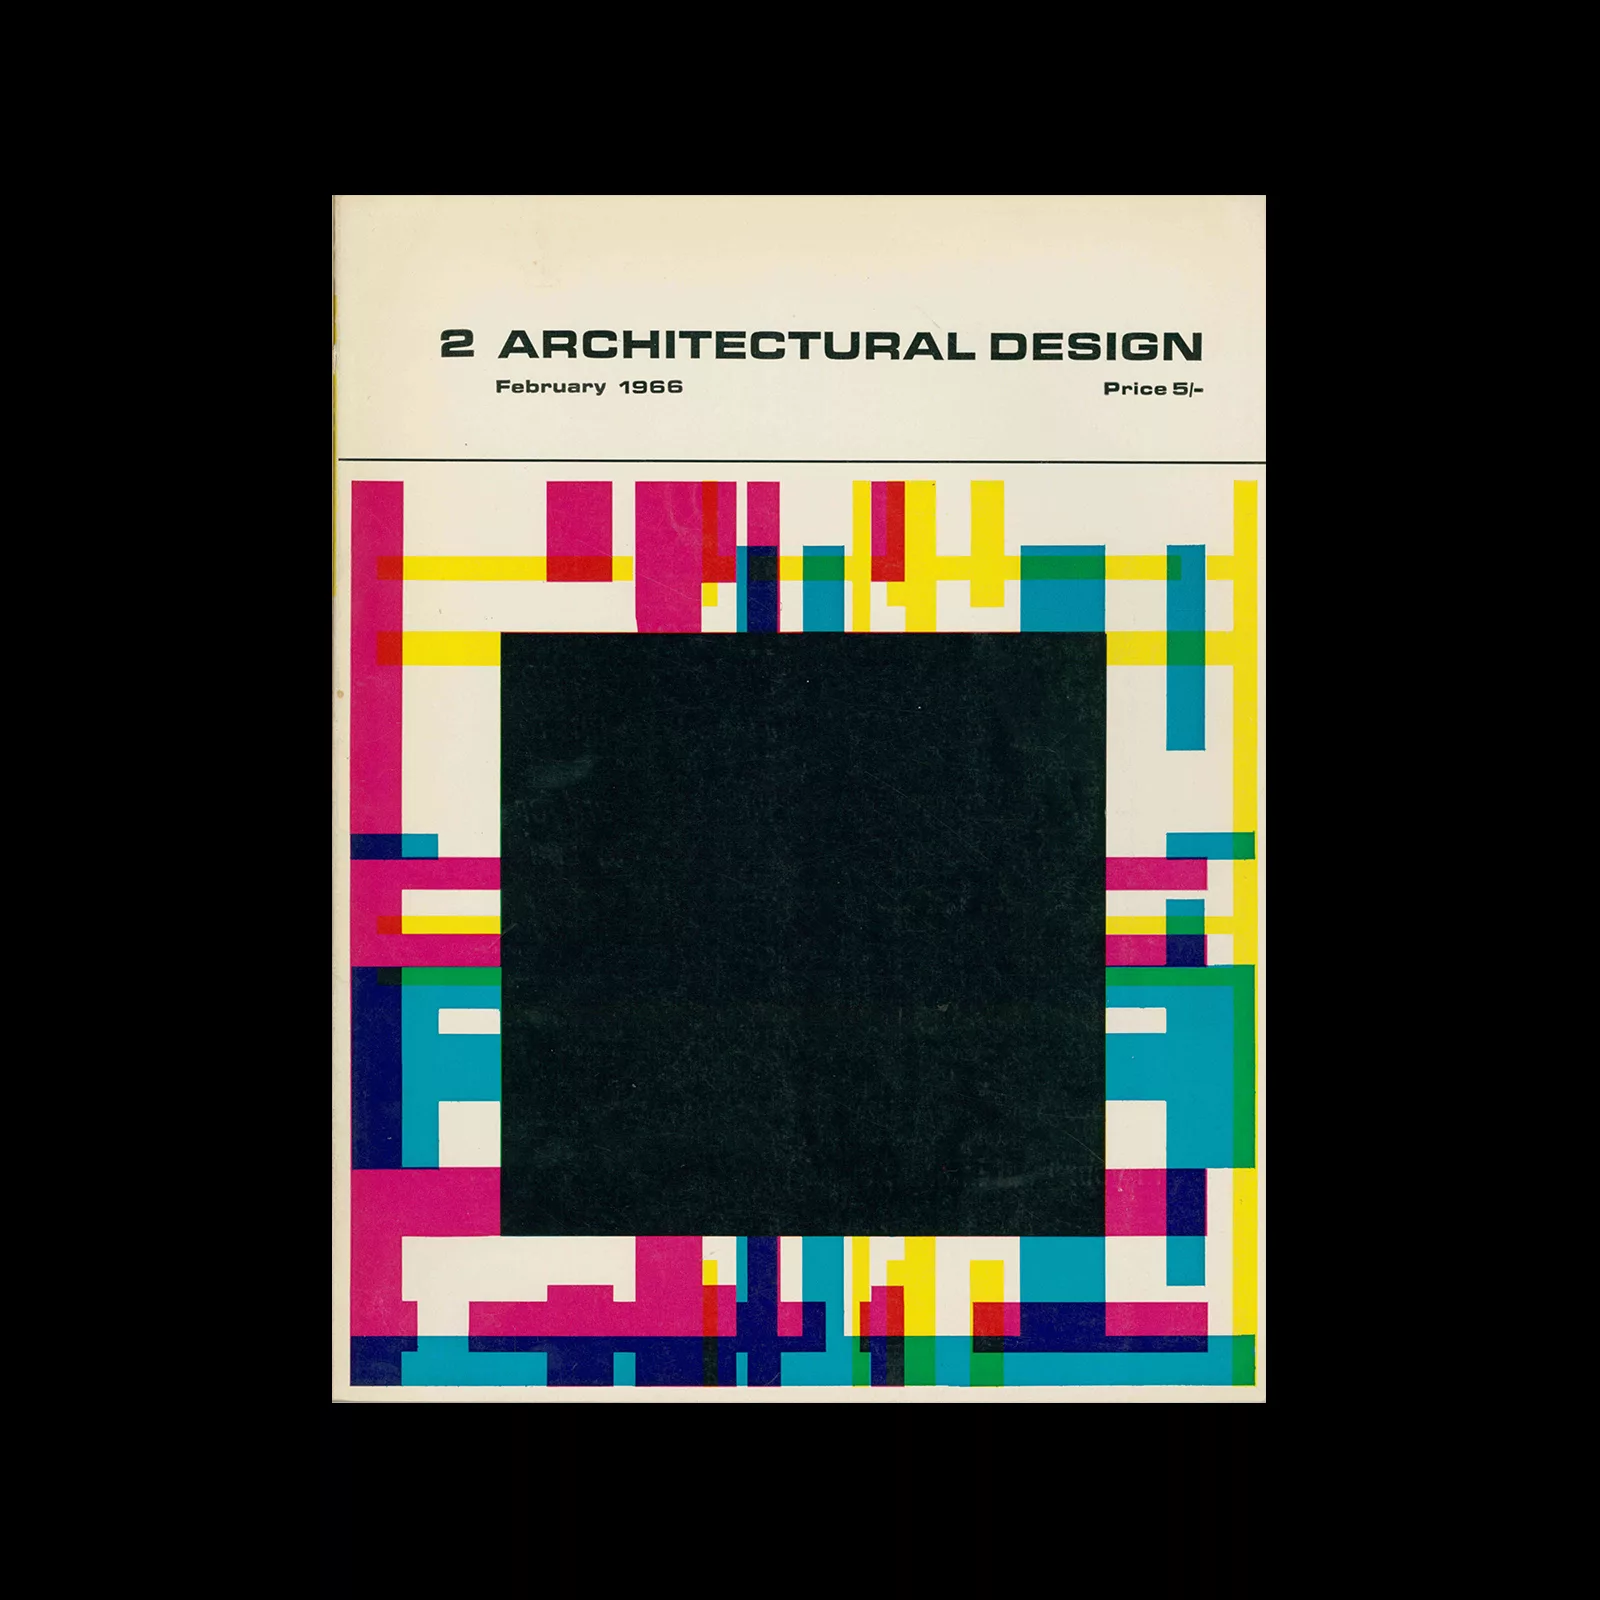 Architectural Design, February 1966. Cover design by Theo Crosby